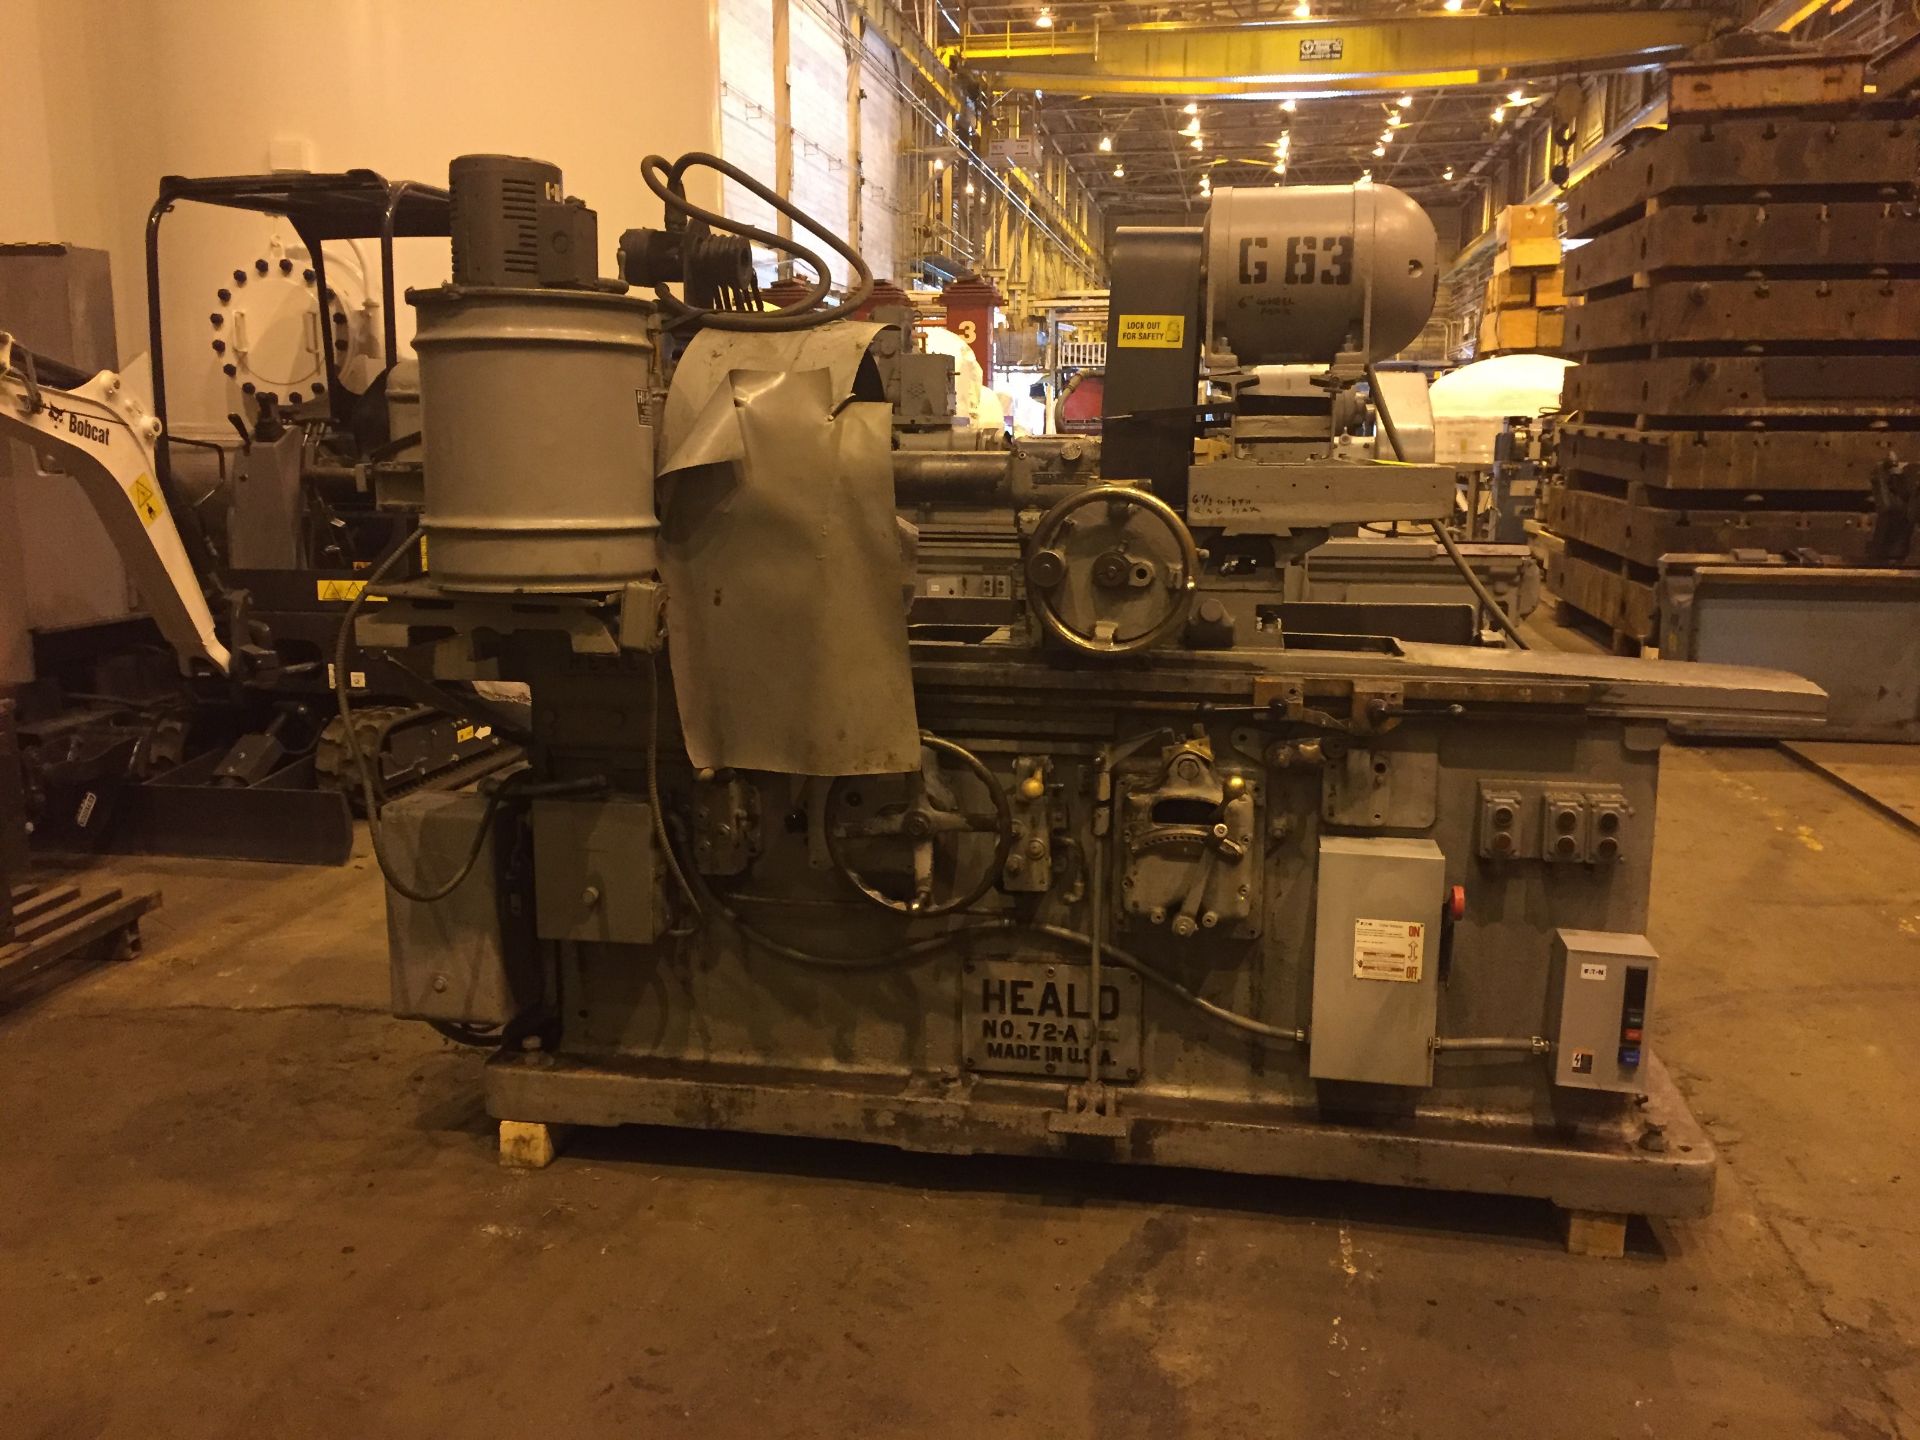 Heald No. 72 A 20 in ID Grinder - G63 - Image 3 of 13